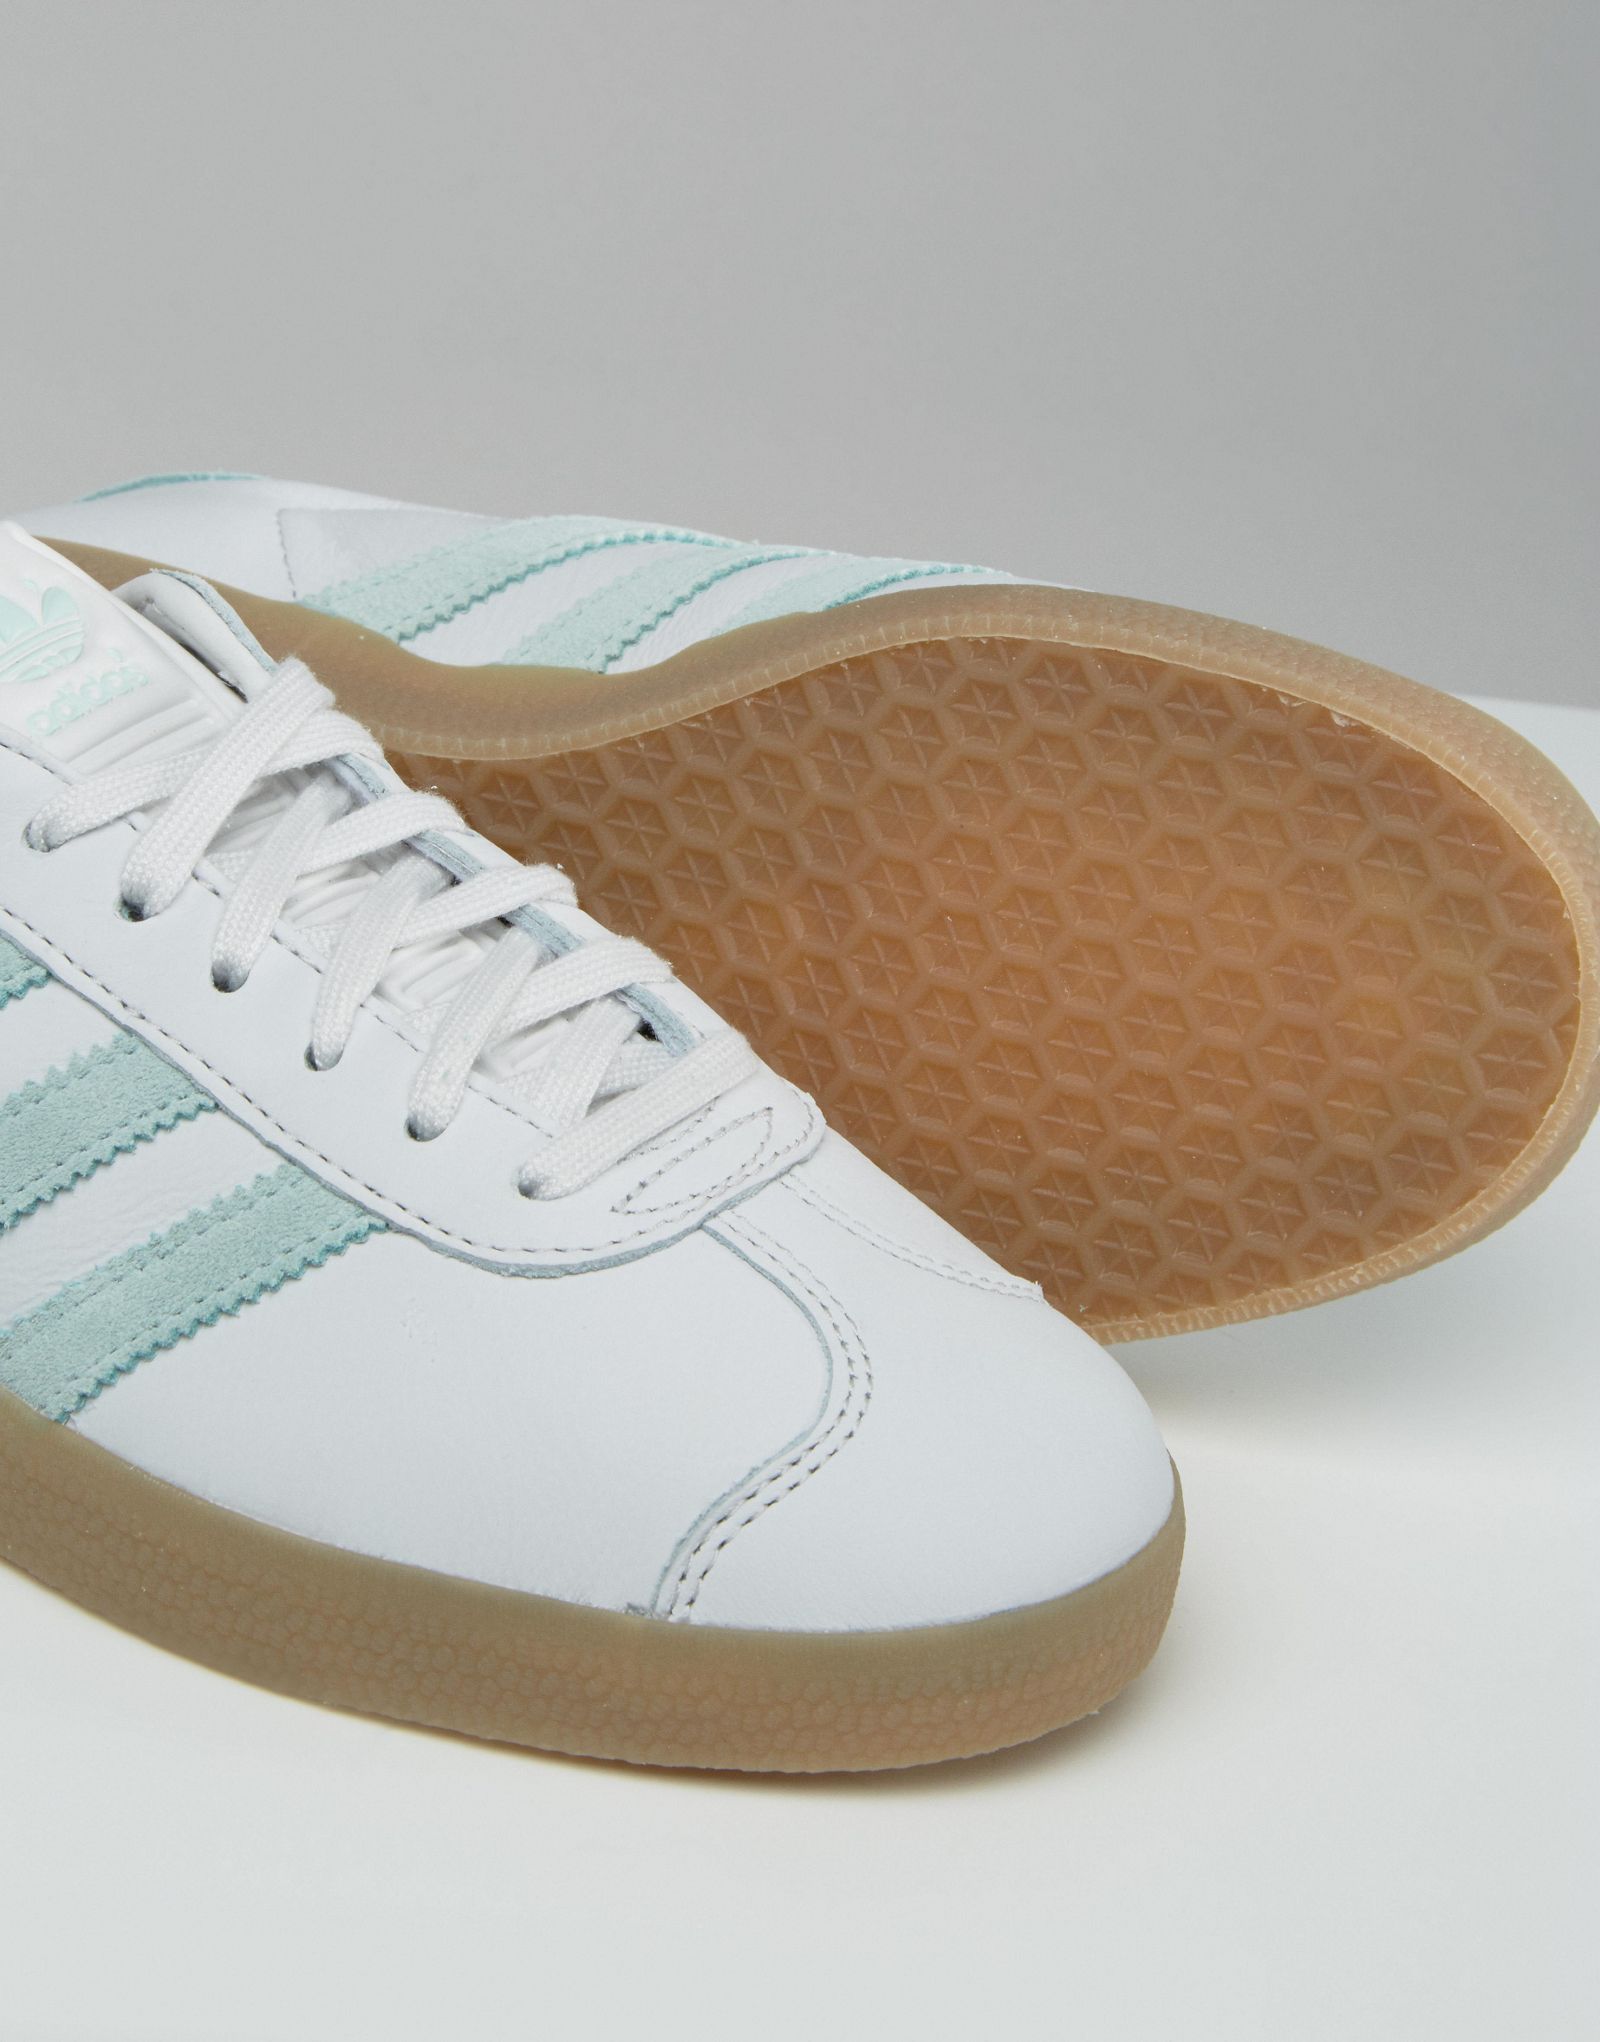 adidas Originals White And Mint Gazelle Sneakers With Gum Sole